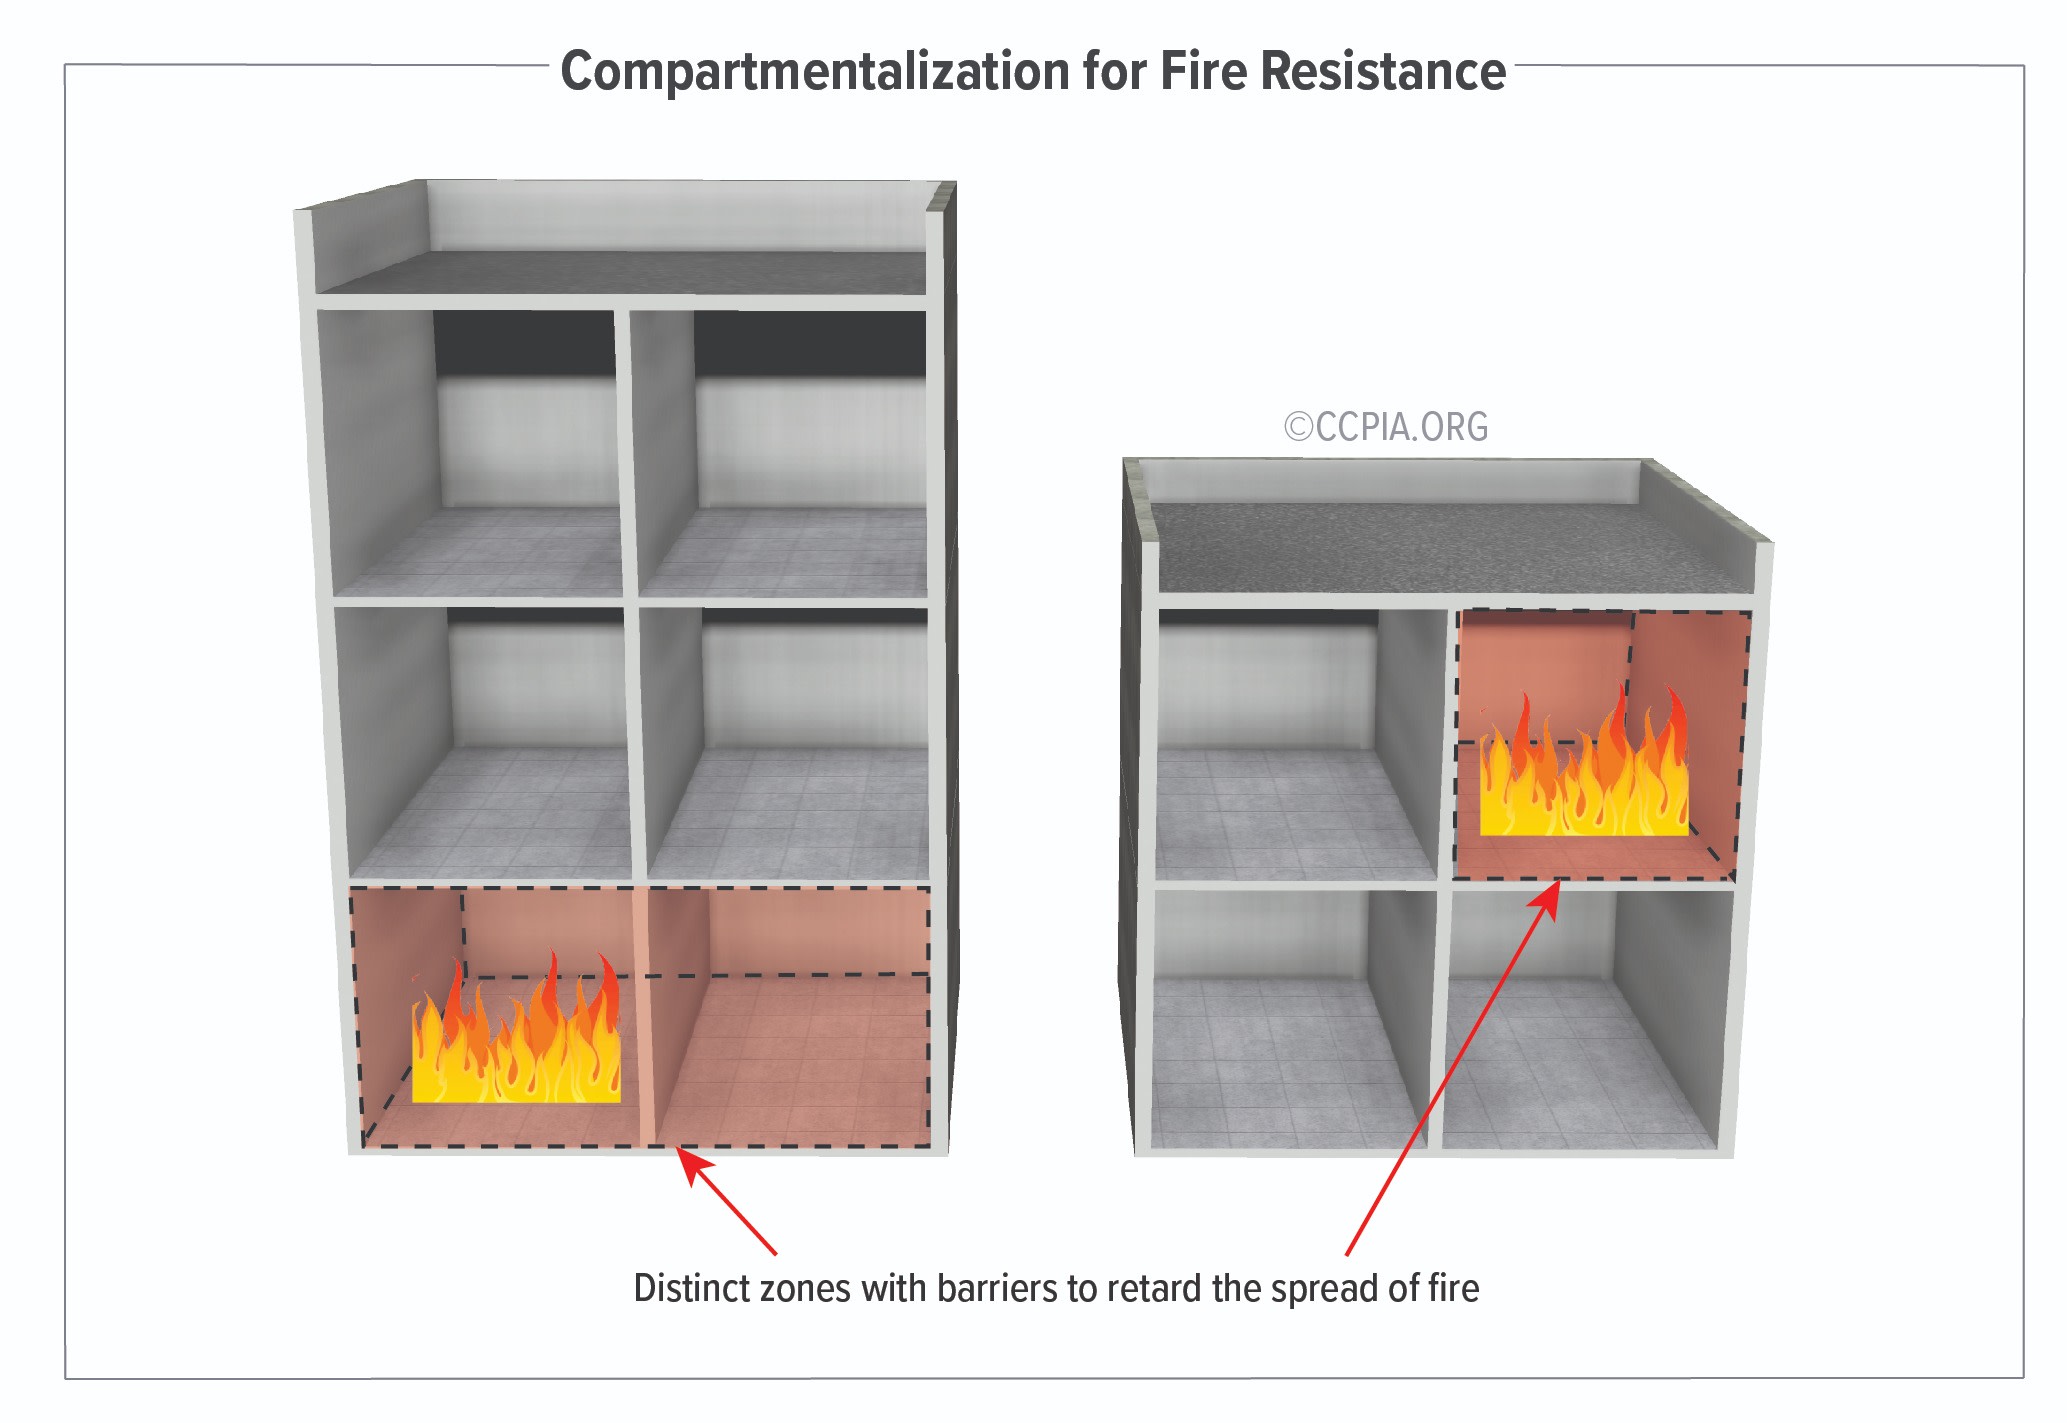 Commercial buildings implement distinct zones with barriers to retard the spread of fire.